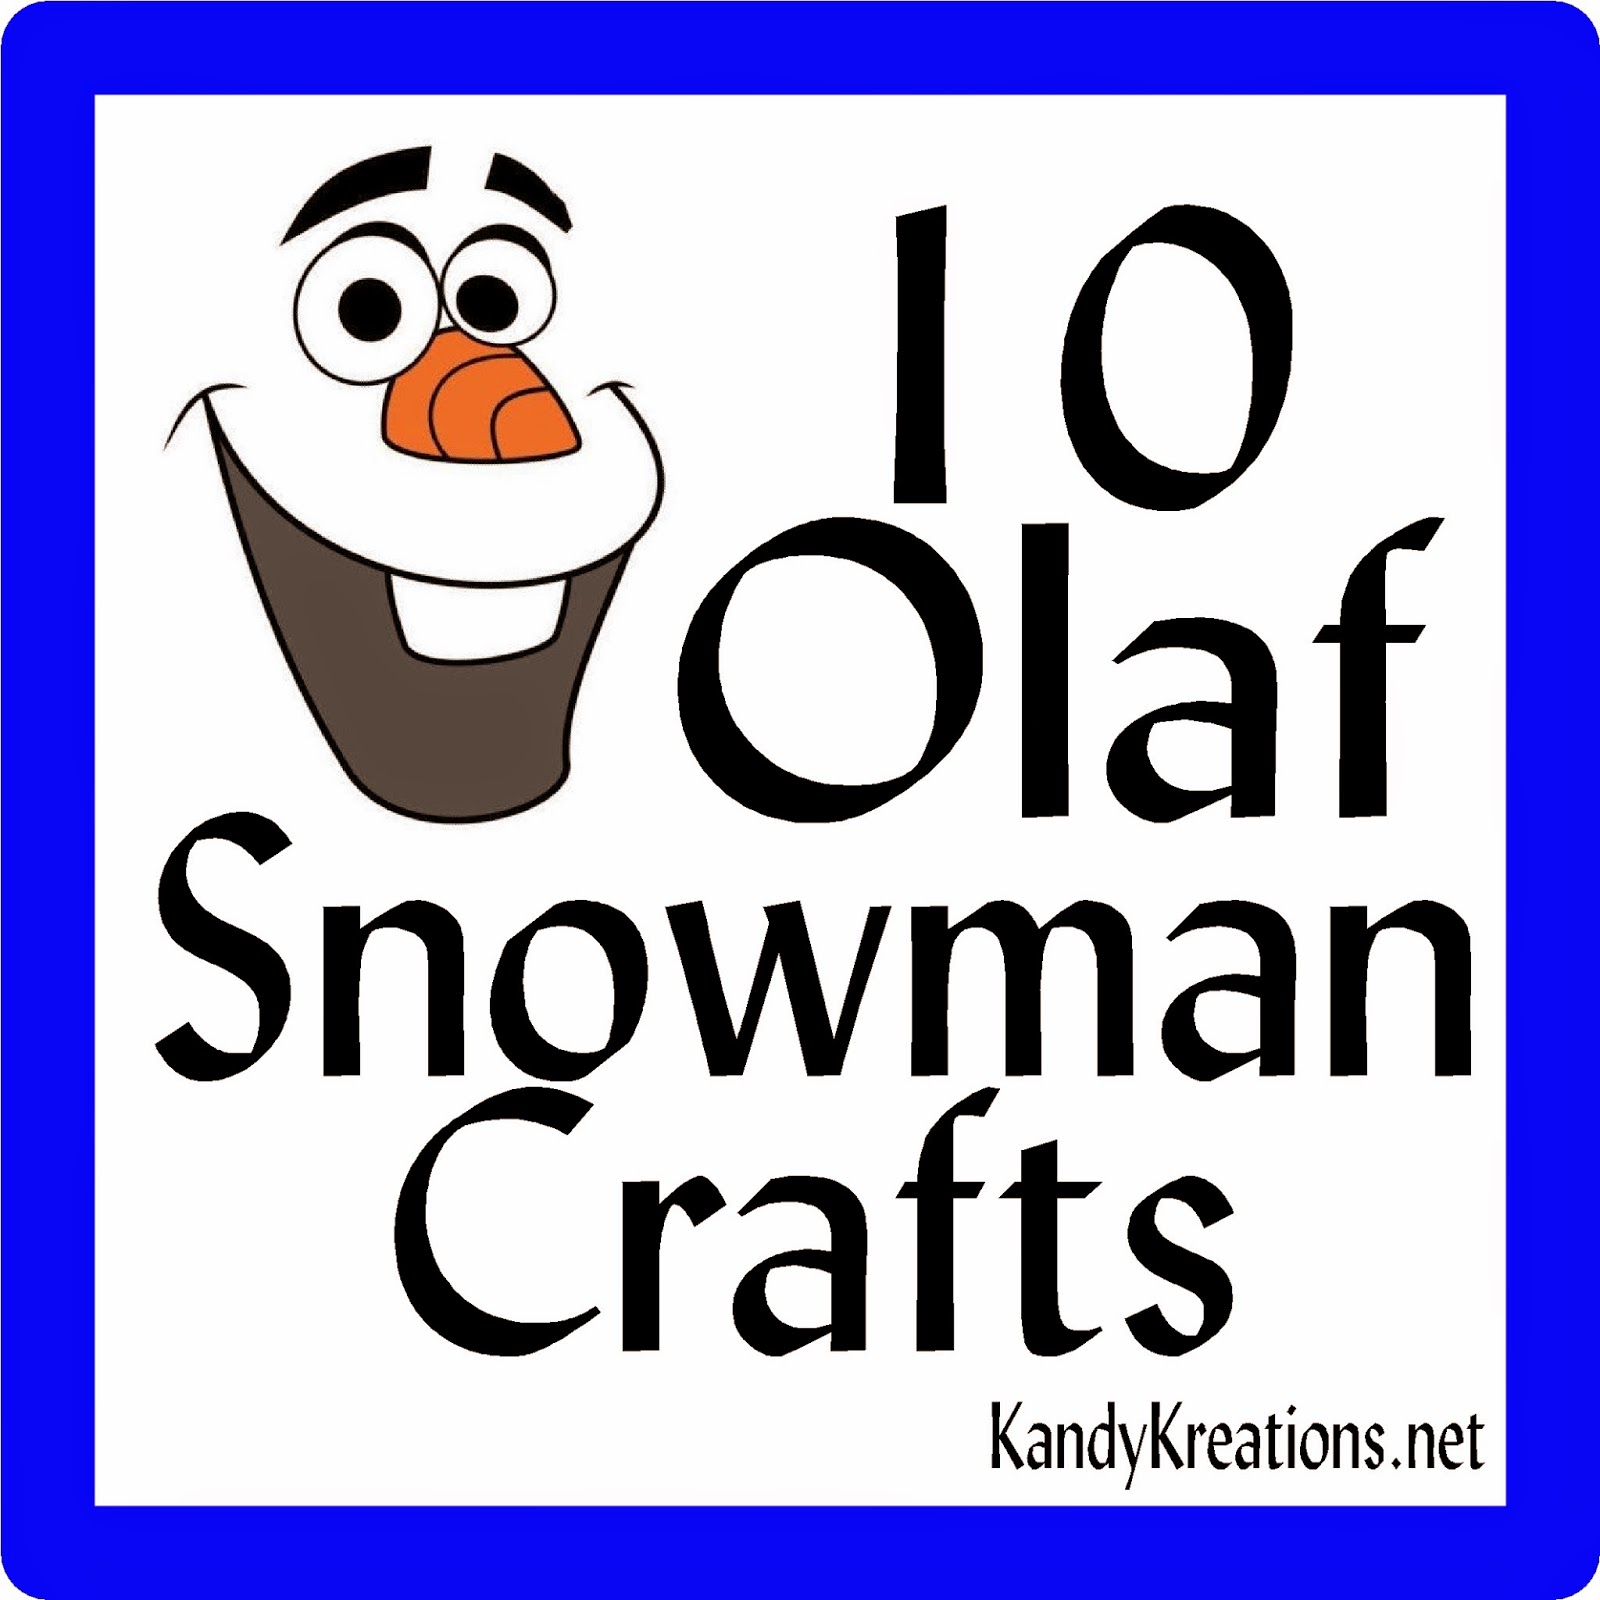 Everyone's favorite snowman, Olaf the Snowman is here with 10 fun crafts that you can make for your Frozen birthday party.  Find out how to make a Snowman Treat jar, a chocolate pretzel craft, a Olaf Night light, and more.